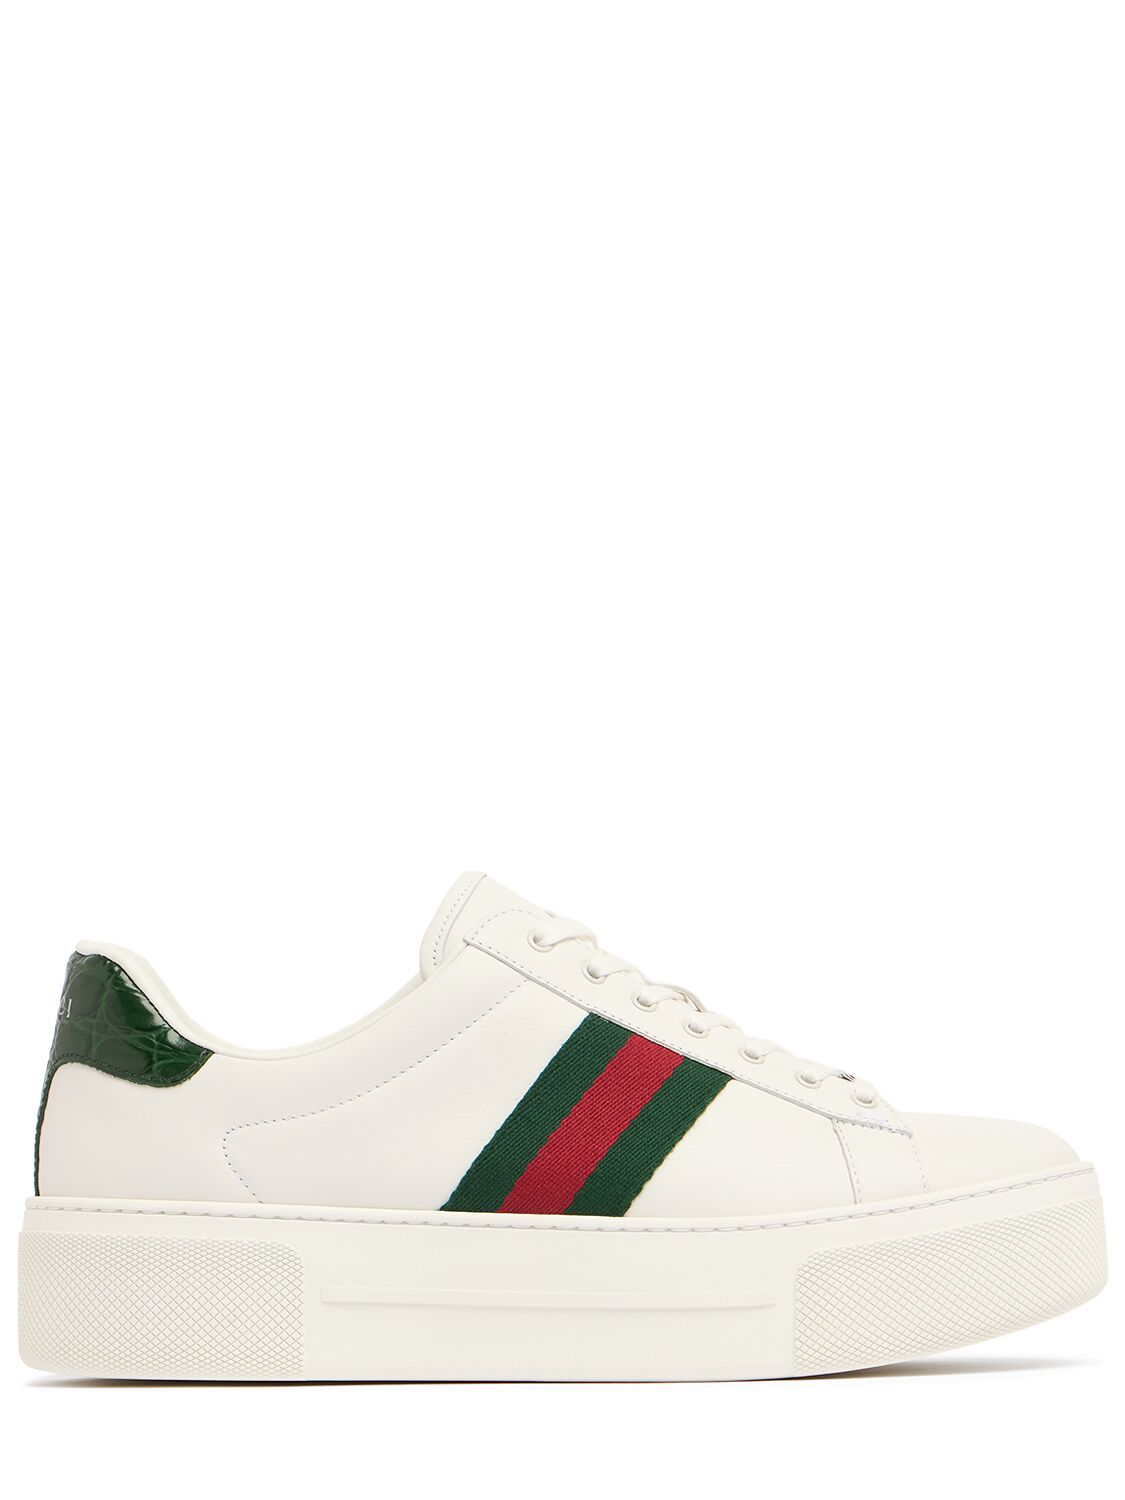 Gucci 30mm  Ace Leather Sneakers In 白色/多色